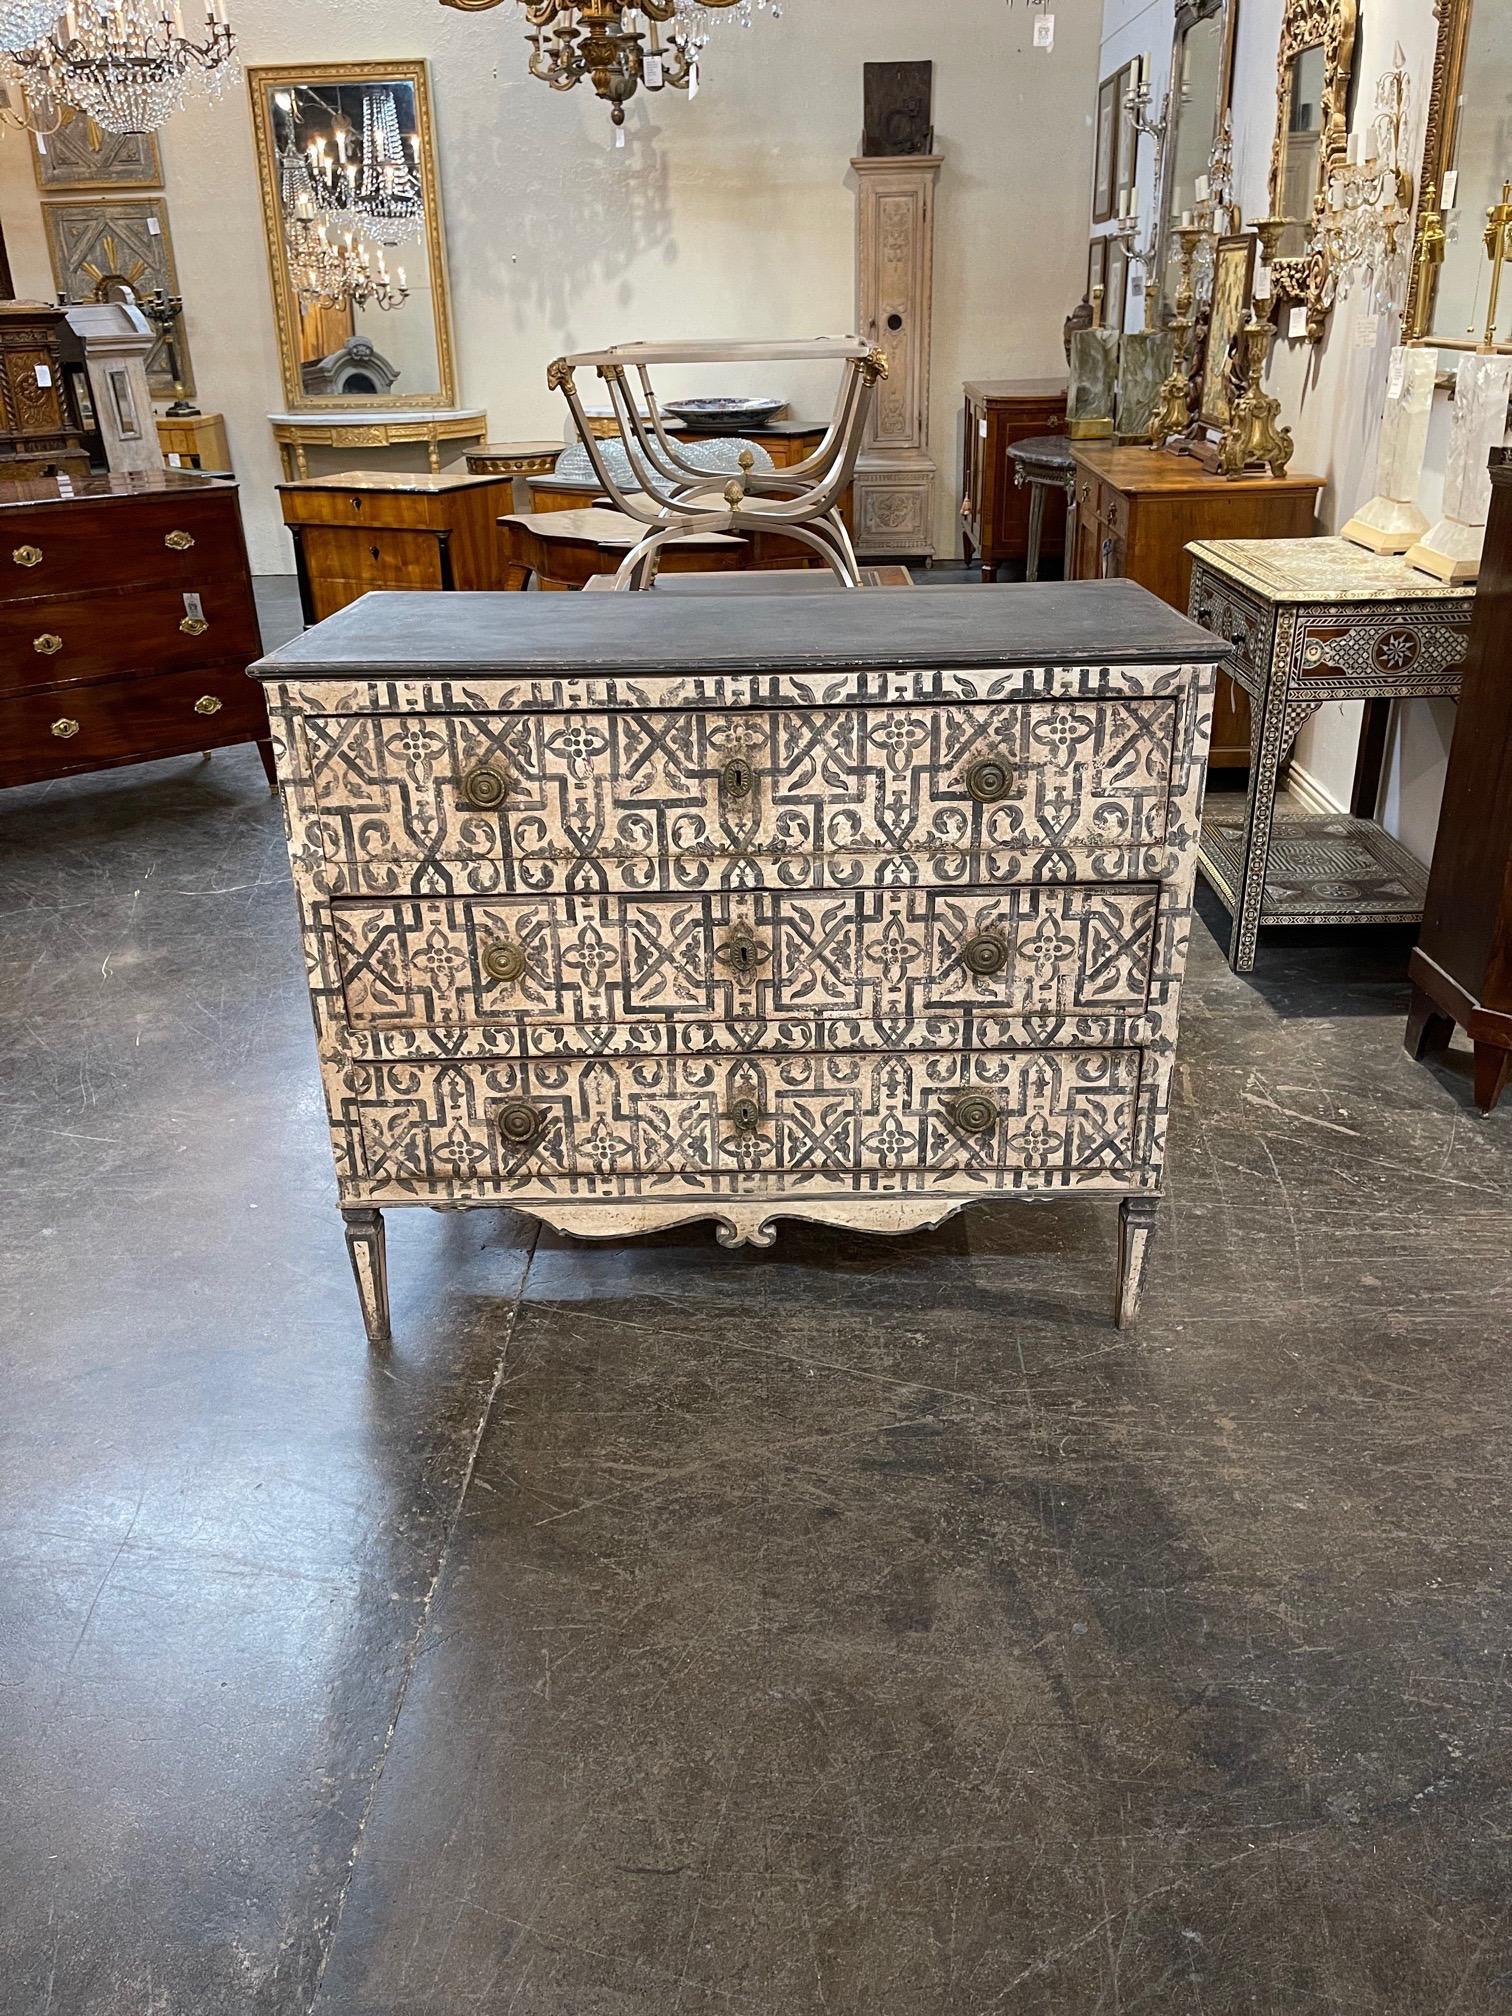 Handsome 19th century Italian Florentine painted commode. Interesting black and white design on this piece. Creates a real impact!